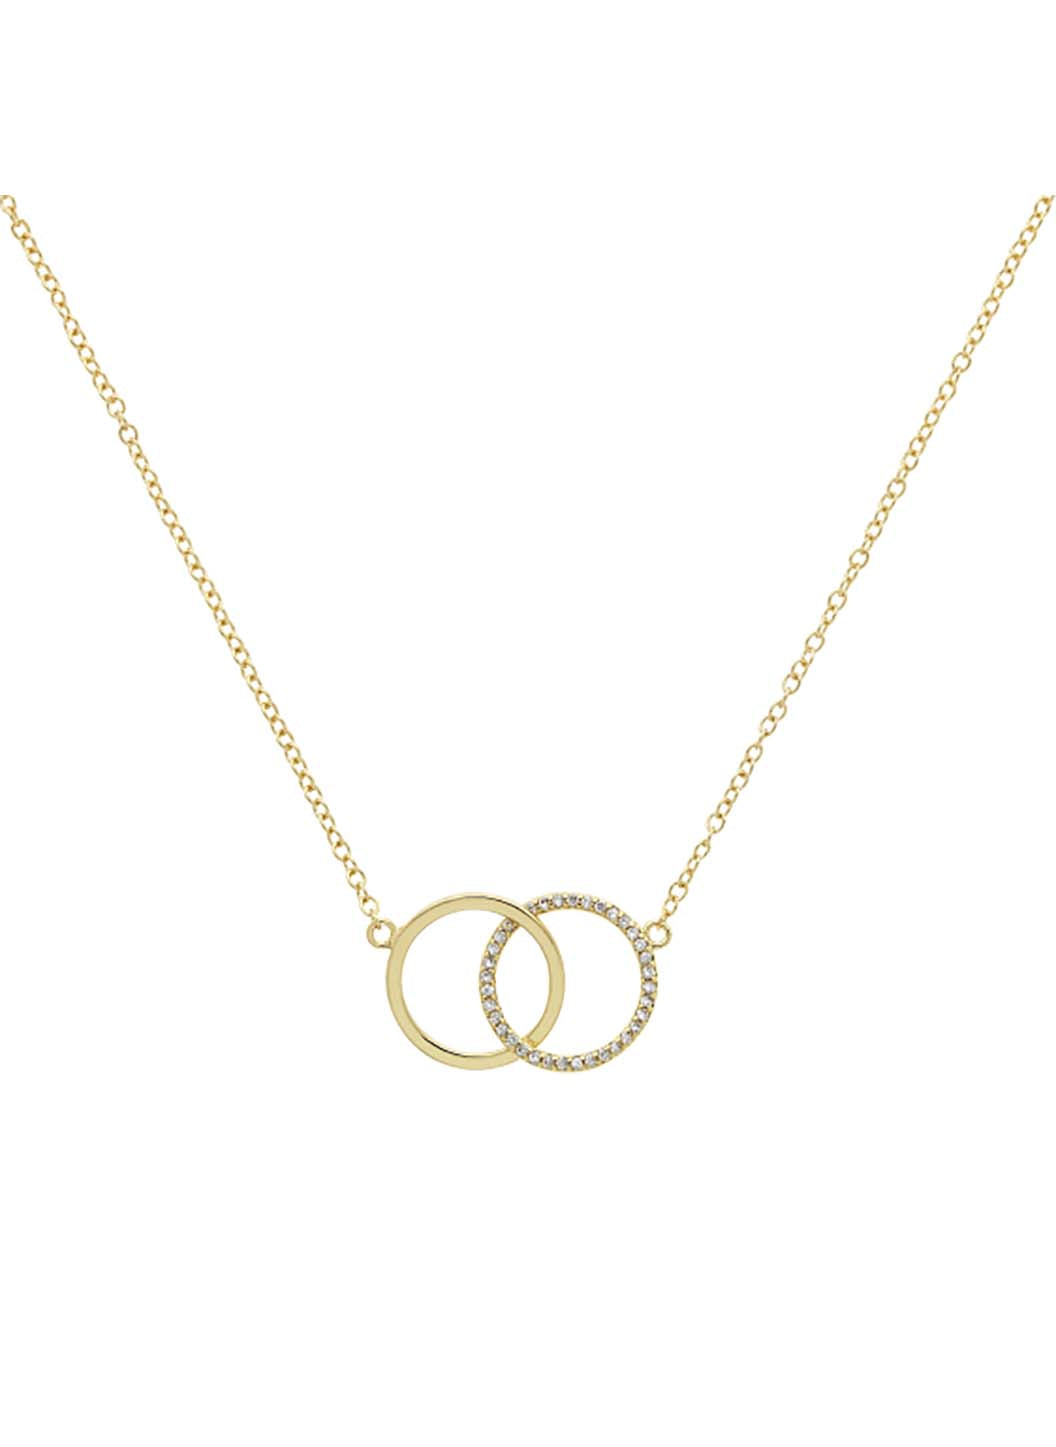 Gold Double Circle Crystal Necklace